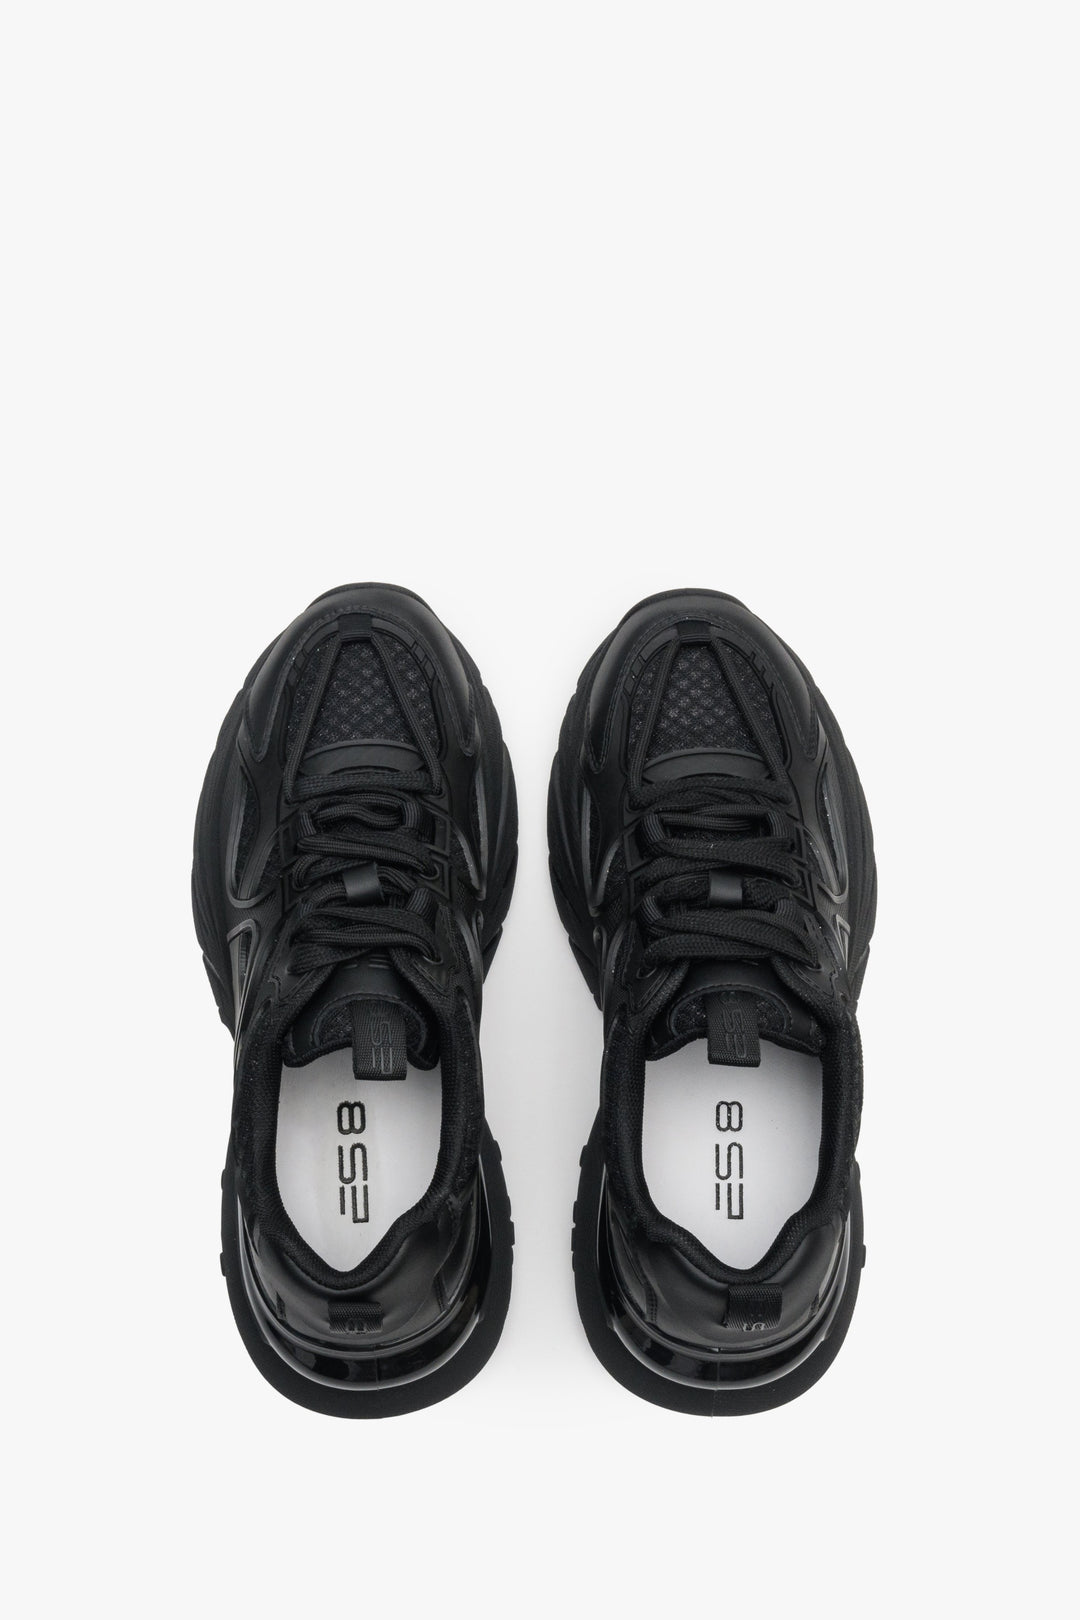 Women's black sneakers ES 8 for spring and autumn - top view presentation of the footwear.